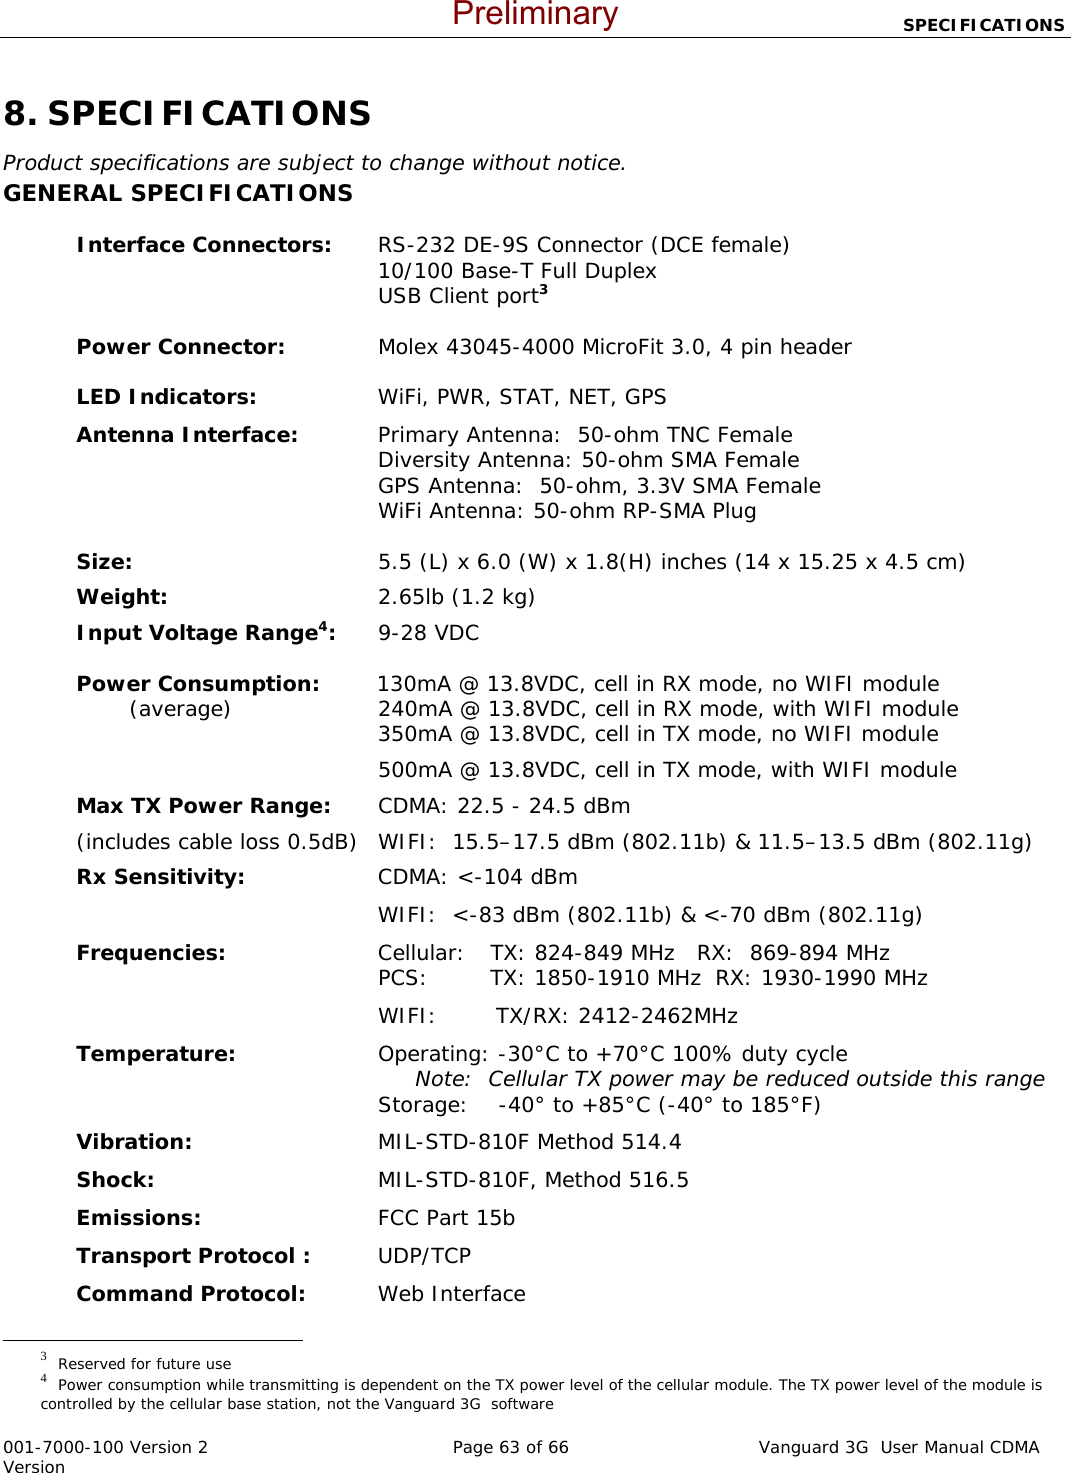                            SPECIFICATIONS  001-7000-100 Version 2       Page 63 of 66       Vanguard 3G  User Manual CDMA Version 8. SPECIFICATIONS Product specifications are subject to change without notice. GENERAL SPECIFICATIONS  Interface Connectors:  RS-232 DE-9S Connector (DCE female)  10/100 Base-T Full Duplex   USB Client port3  Power Connector:  Molex 43045-4000 MicroFit 3.0, 4 pin header  LED Indicators:  WiFi, PWR, STAT, NET, GPS Antenna Interface:   Primary Antenna:  50-ohm TNC Female  Diversity Antenna: 50-ohm SMA Female   GPS Antenna:  50-ohm, 3.3V SMA Female   WiFi Antenna: 50-ohm RP-SMA Plug   Size:  5.5 (L) x 6.0 (W) x 1.8(H) inches (14 x 15.25 x 4.5 cm) Weight:   2.65lb (1.2 kg) Input Voltage Range4:   9-28 VDC   Power Consumption:        130mA @ 13.8VDC, cell in RX mode, no WIFI module           (average)  240mA @ 13.8VDC, cell in RX mode, with WIFI module  350mA @ 13.8VDC, cell in TX mode, no WIFI module   500mA @ 13.8VDC, cell in TX mode, with WIFI module Max TX Power Range:  CDMA: 22.5 - 24.5 dBm   (includes cable loss 0.5dB)   WIFI:  15.5–17.5 dBm (802.11b) &amp; 11.5–13.5 dBm (802.11g) Rx Sensitivity:  CDMA: &lt;-104 dBm   WIFI:  &lt;-83 dBm (802.11b) &amp; &lt;-70 dBm (802.11g) Frequencies:  Cellular:  TX: 824-849 MHz  RX:  869-894 MHz   PCS:  TX: 1850-1910 MHz  RX: 1930-1990 MHz    WIFI:        TX/RX: 2412-2462MHz                                                      Temperature:  Operating: -30°C to +70°C 100% duty cycle   Note:  Cellular TX power may be reduced outside this range   Storage:    -40° to +85°C (-40° to 185°F) Vibration:    MIL-STD-810F Method 514.4 Shock:  MIL-STD-810F, Method 516.5 Emissions:  FCC Part 15b  Transport Protocol : UDP/TCP Command Protocol:     Web Interface                                                  3  Reserved for future use 4  Power consumption while transmitting is dependent on the TX power level of the cellular module. The TX power level of the module is controlled by the cellular base station, not the Vanguard 3G  software   Preliminary